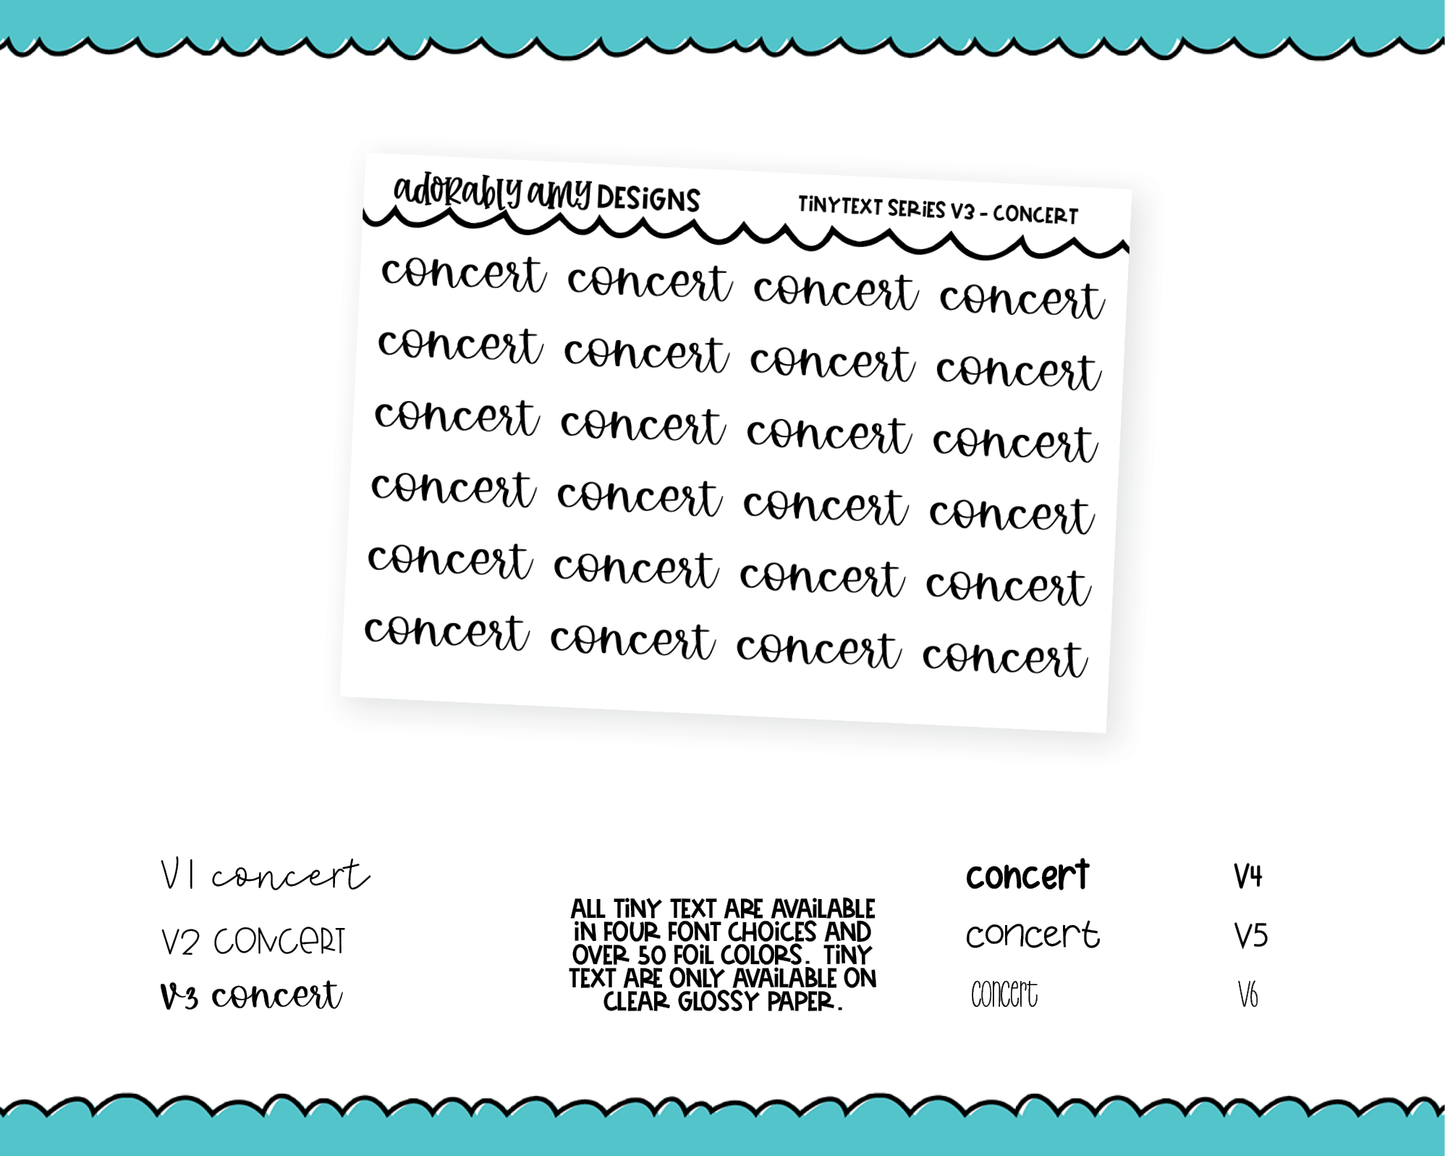 Foiled Tiny Text Series - Concert Checklist Size Planner Stickers for any Planner or Insert